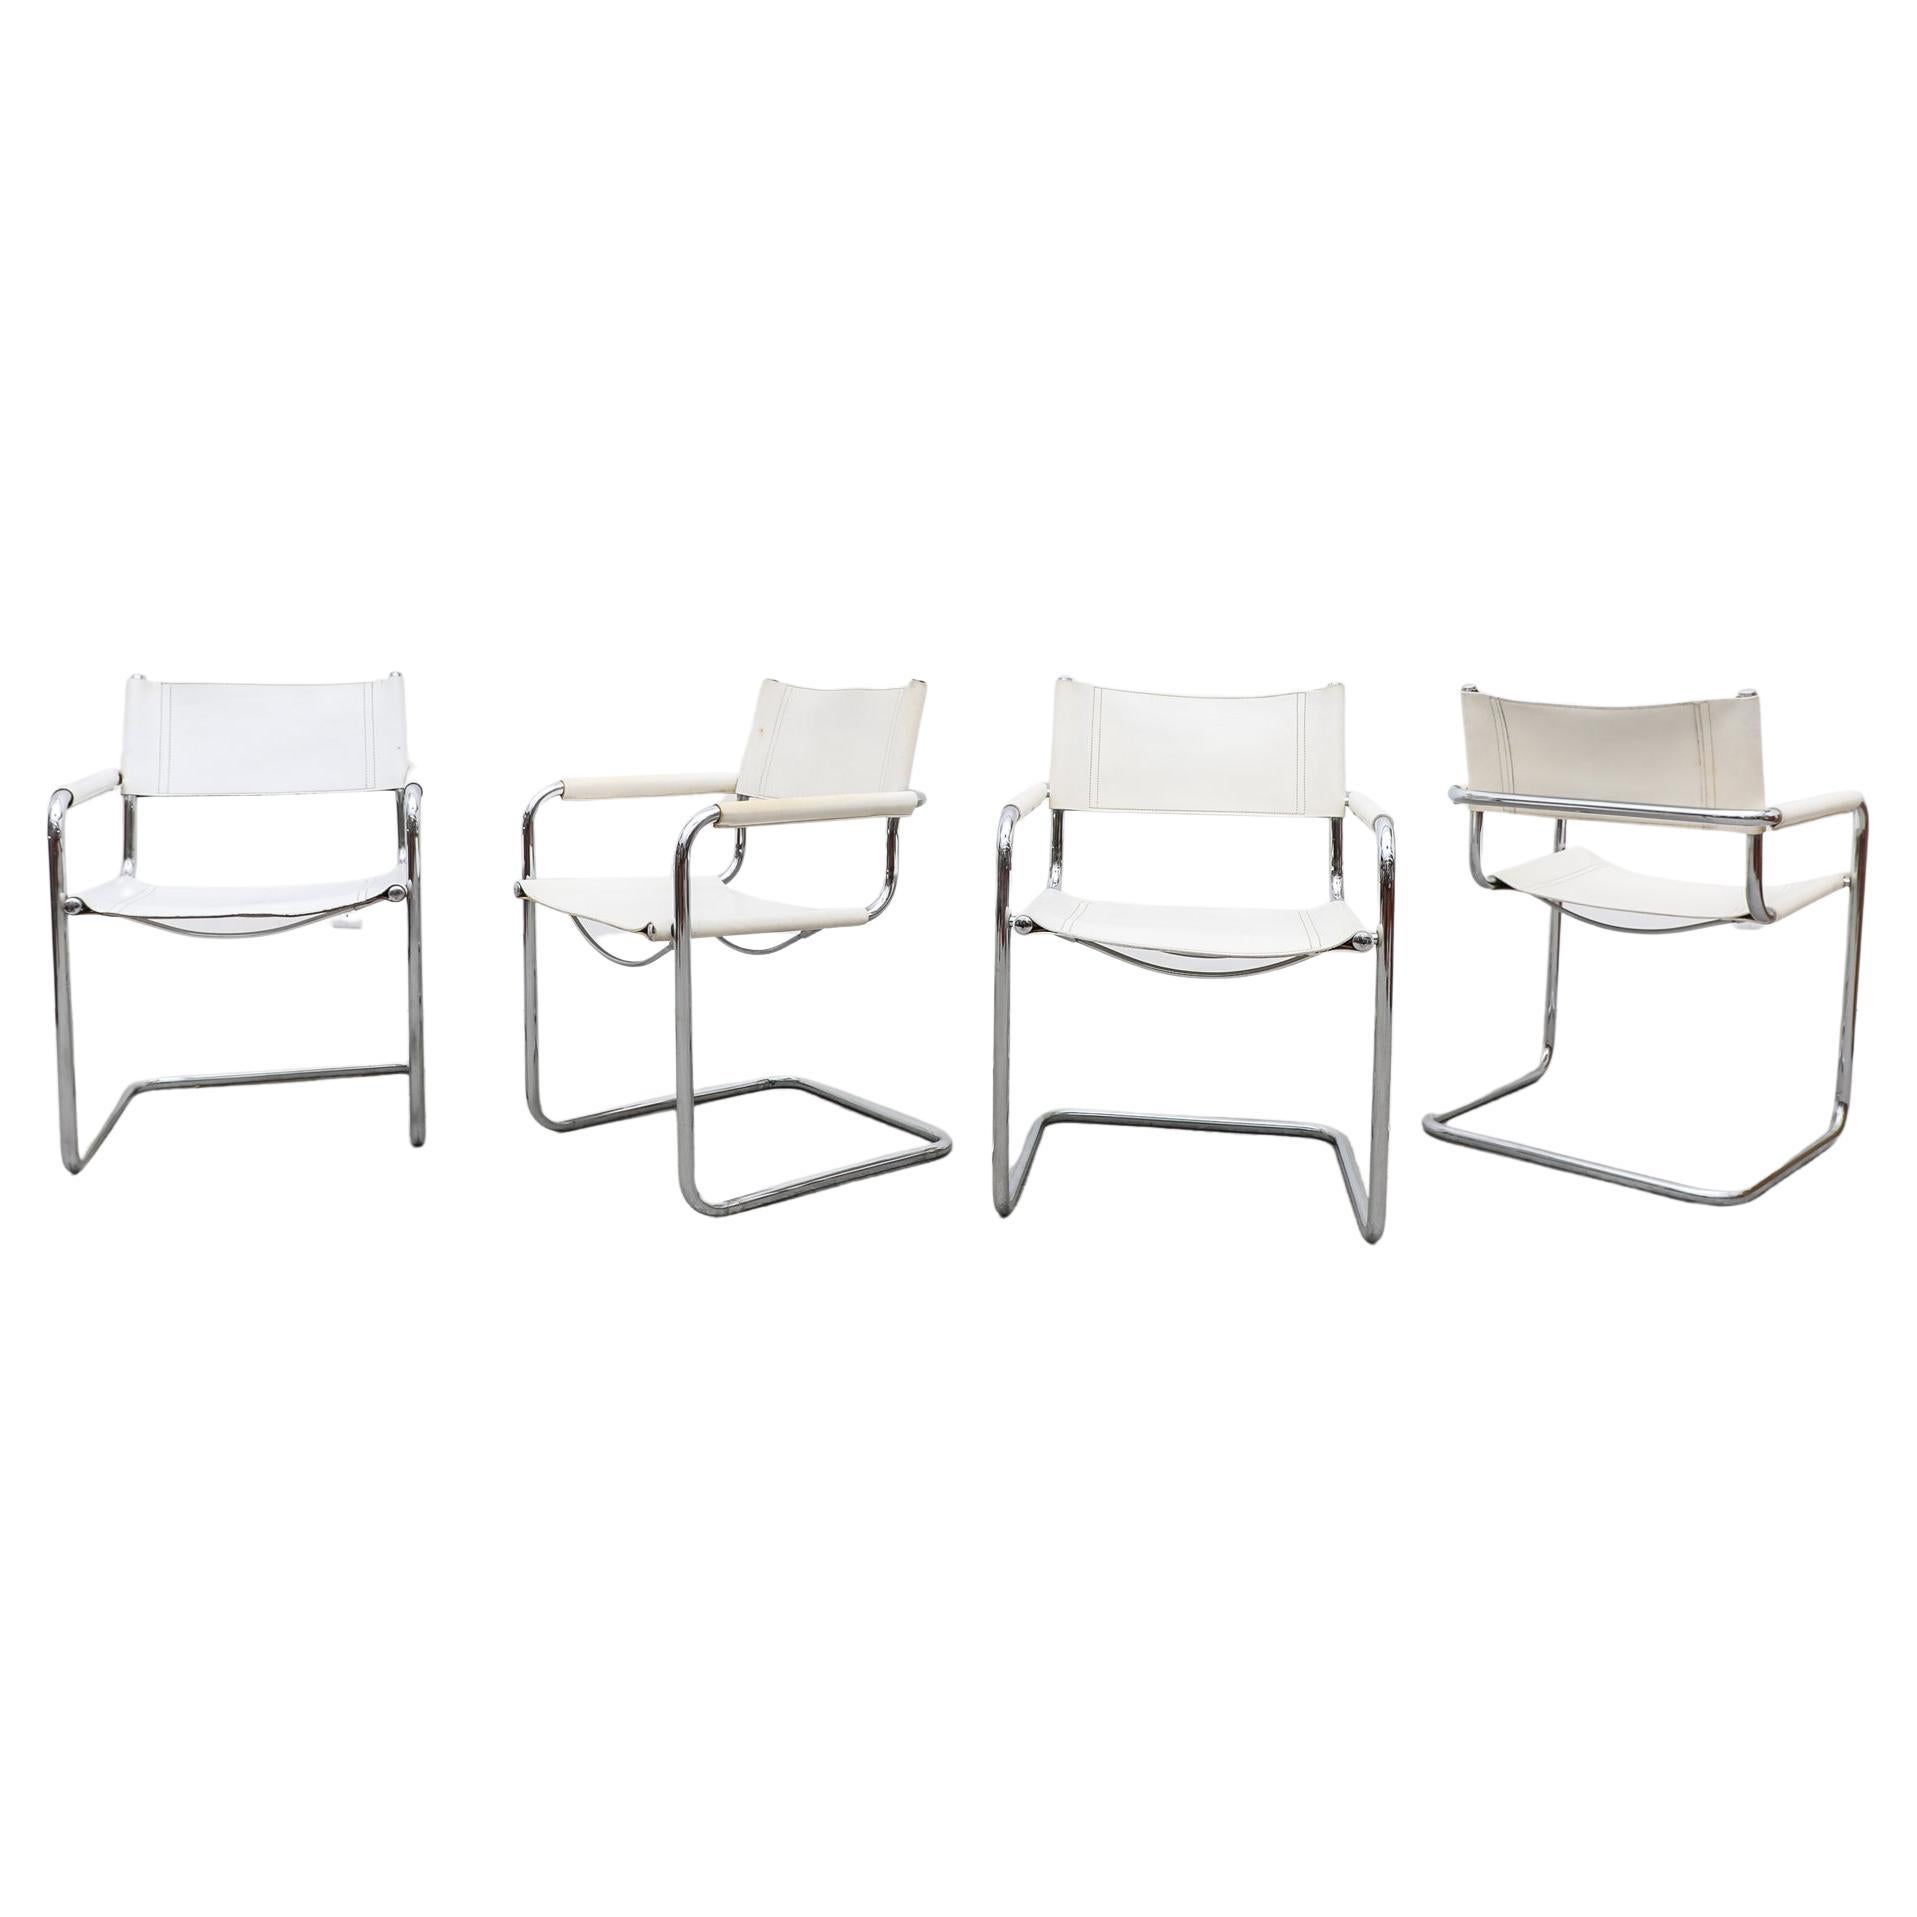 Set of 4 Marcel Breuer Style White Leather Chairs